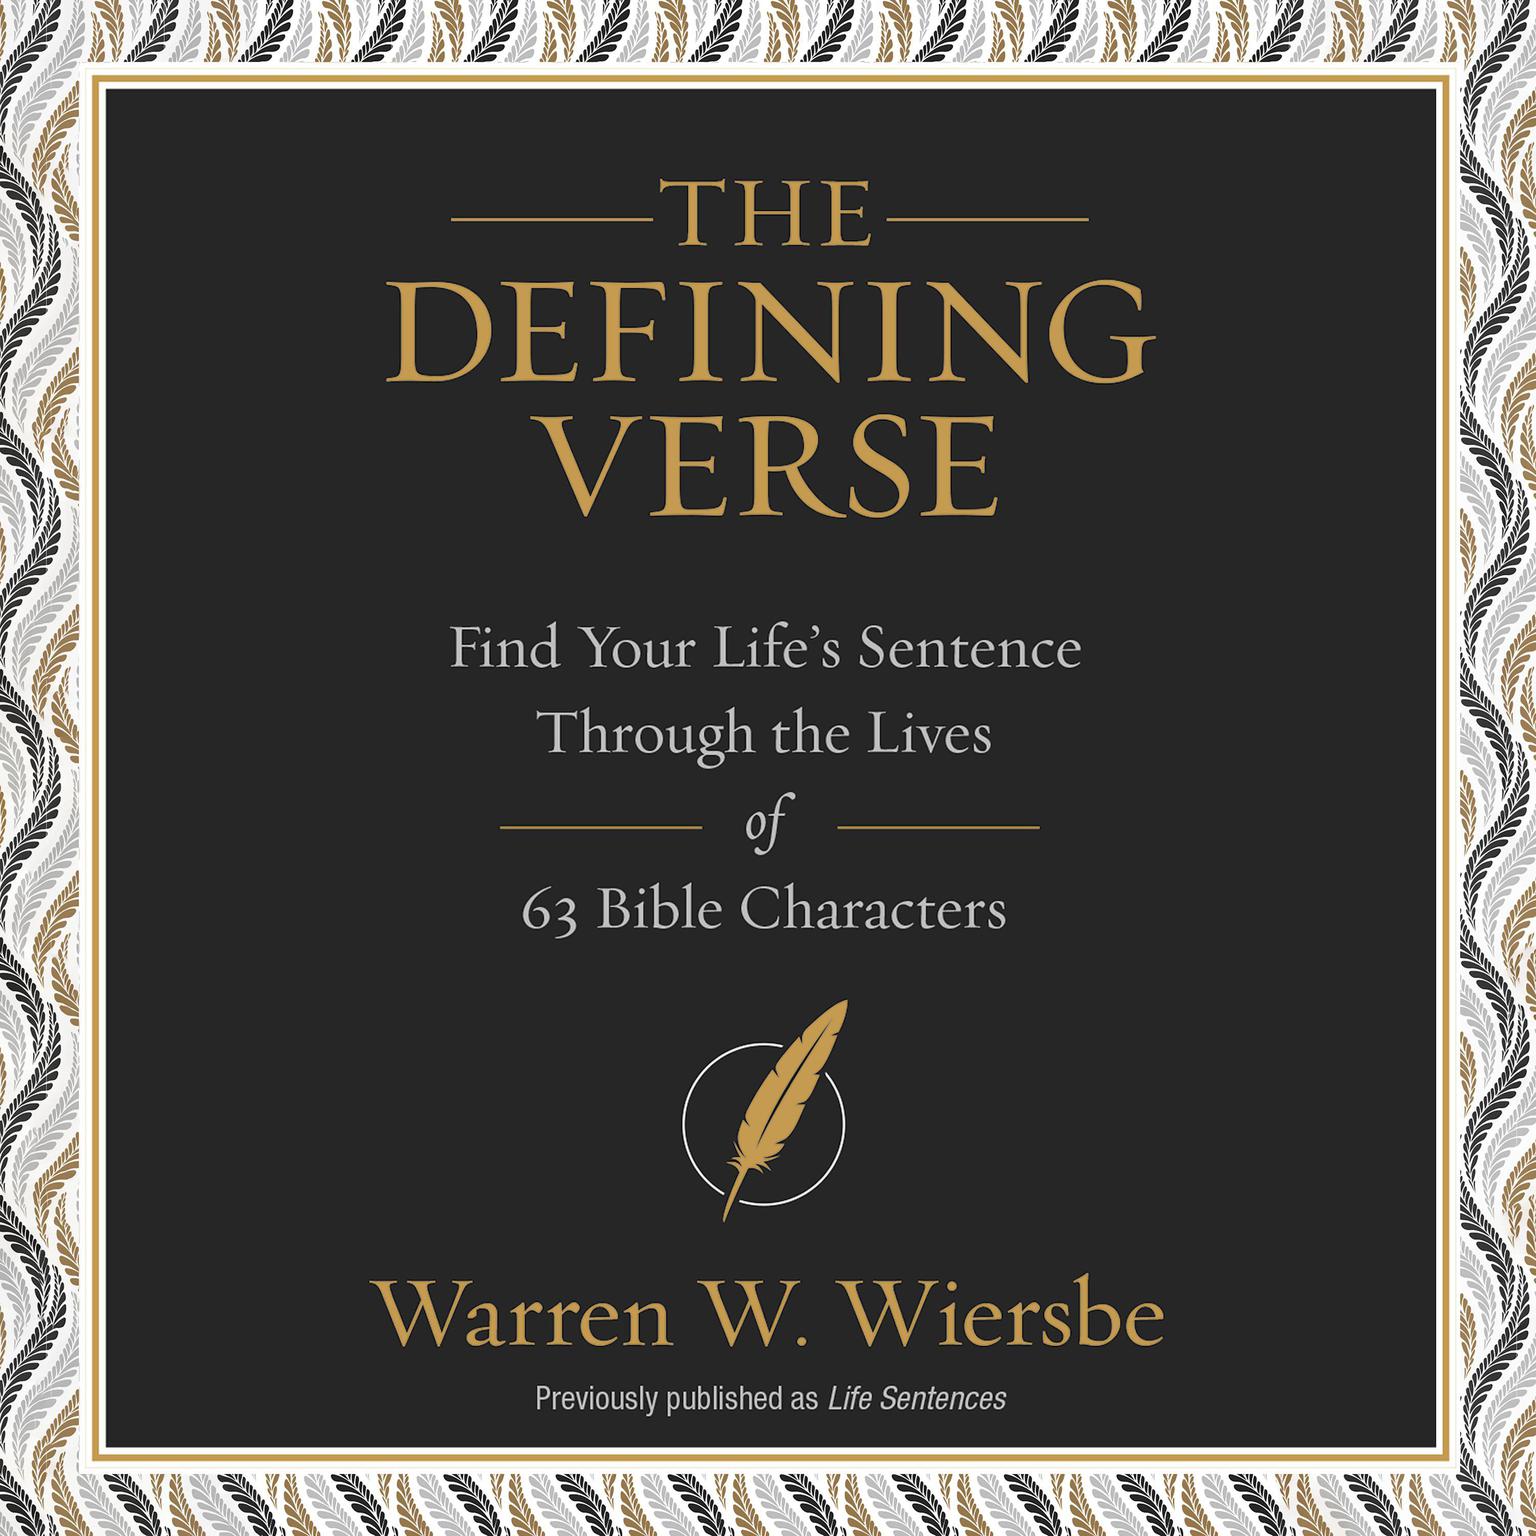 The Defining Verse: Find Your Life’s Sentence Through the Lives of 63 Bible Characters Audiobook, by Warren W. Wiersbe